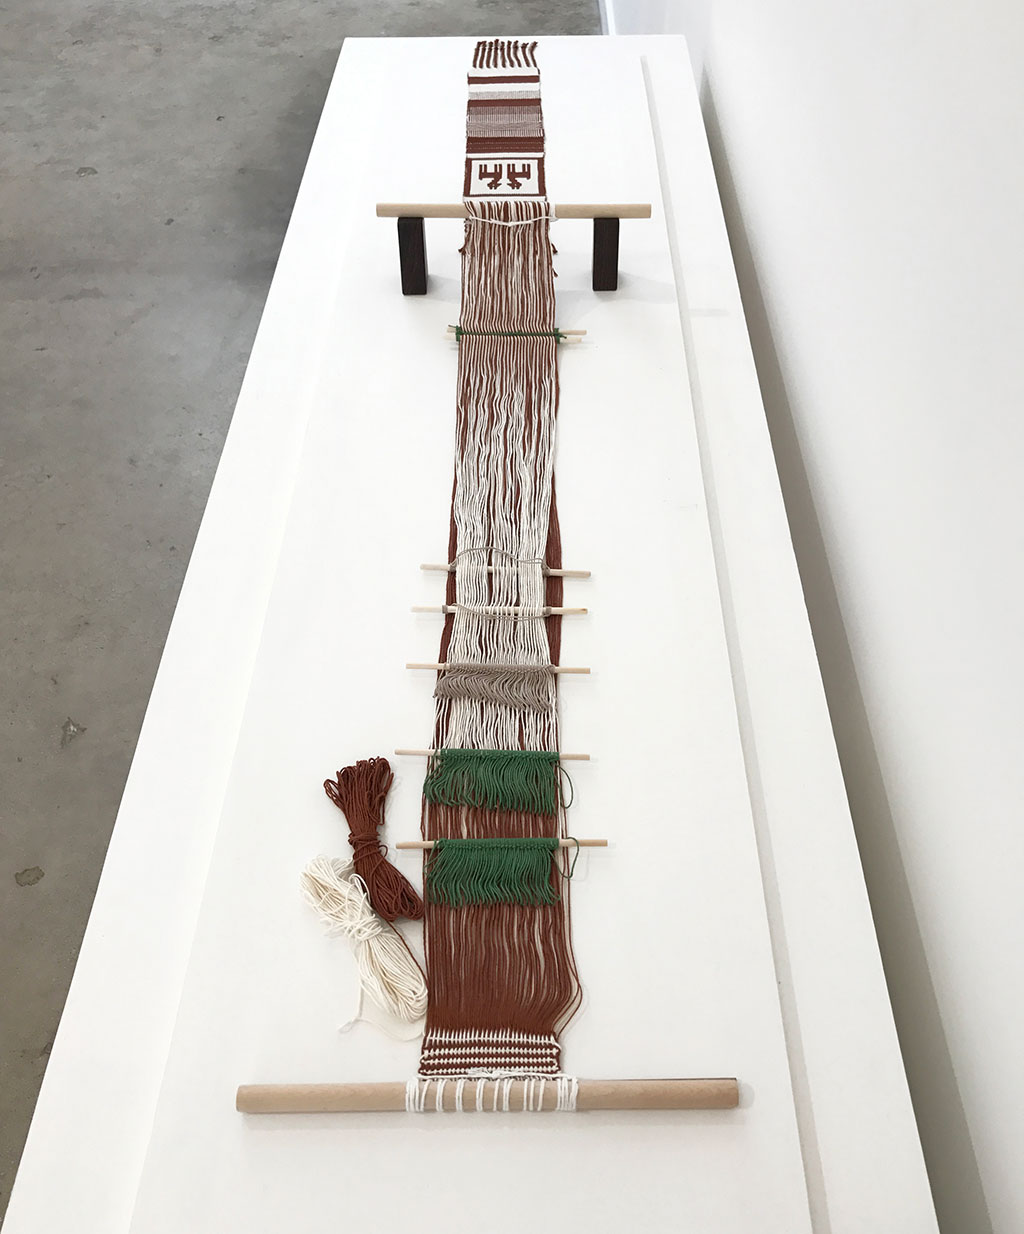 Jennifer Moore, Backstrap loom and double-weave sampler, 2013, cotton, double-weave pickup. Albers dedicated her seminal text, On Weaving, “to my great teachers, the weavers of ancient Peru.” After conquest by the Spanish, some ancient Peruvian weaving techniques, including double-weave, fell into disuse. Nilda Callanaupa, the founder and director of the Center for Traditional Textiles of Cusco, invited Moore to teach double-weave pick-up techniques to members of several Quechua weaving communities at a conference held in Cusco in 2013. This is an example of the looms used and the sampler each weaver made at the conference. Material Meaning: A Living Legacy of Anni Albers, Craft in America